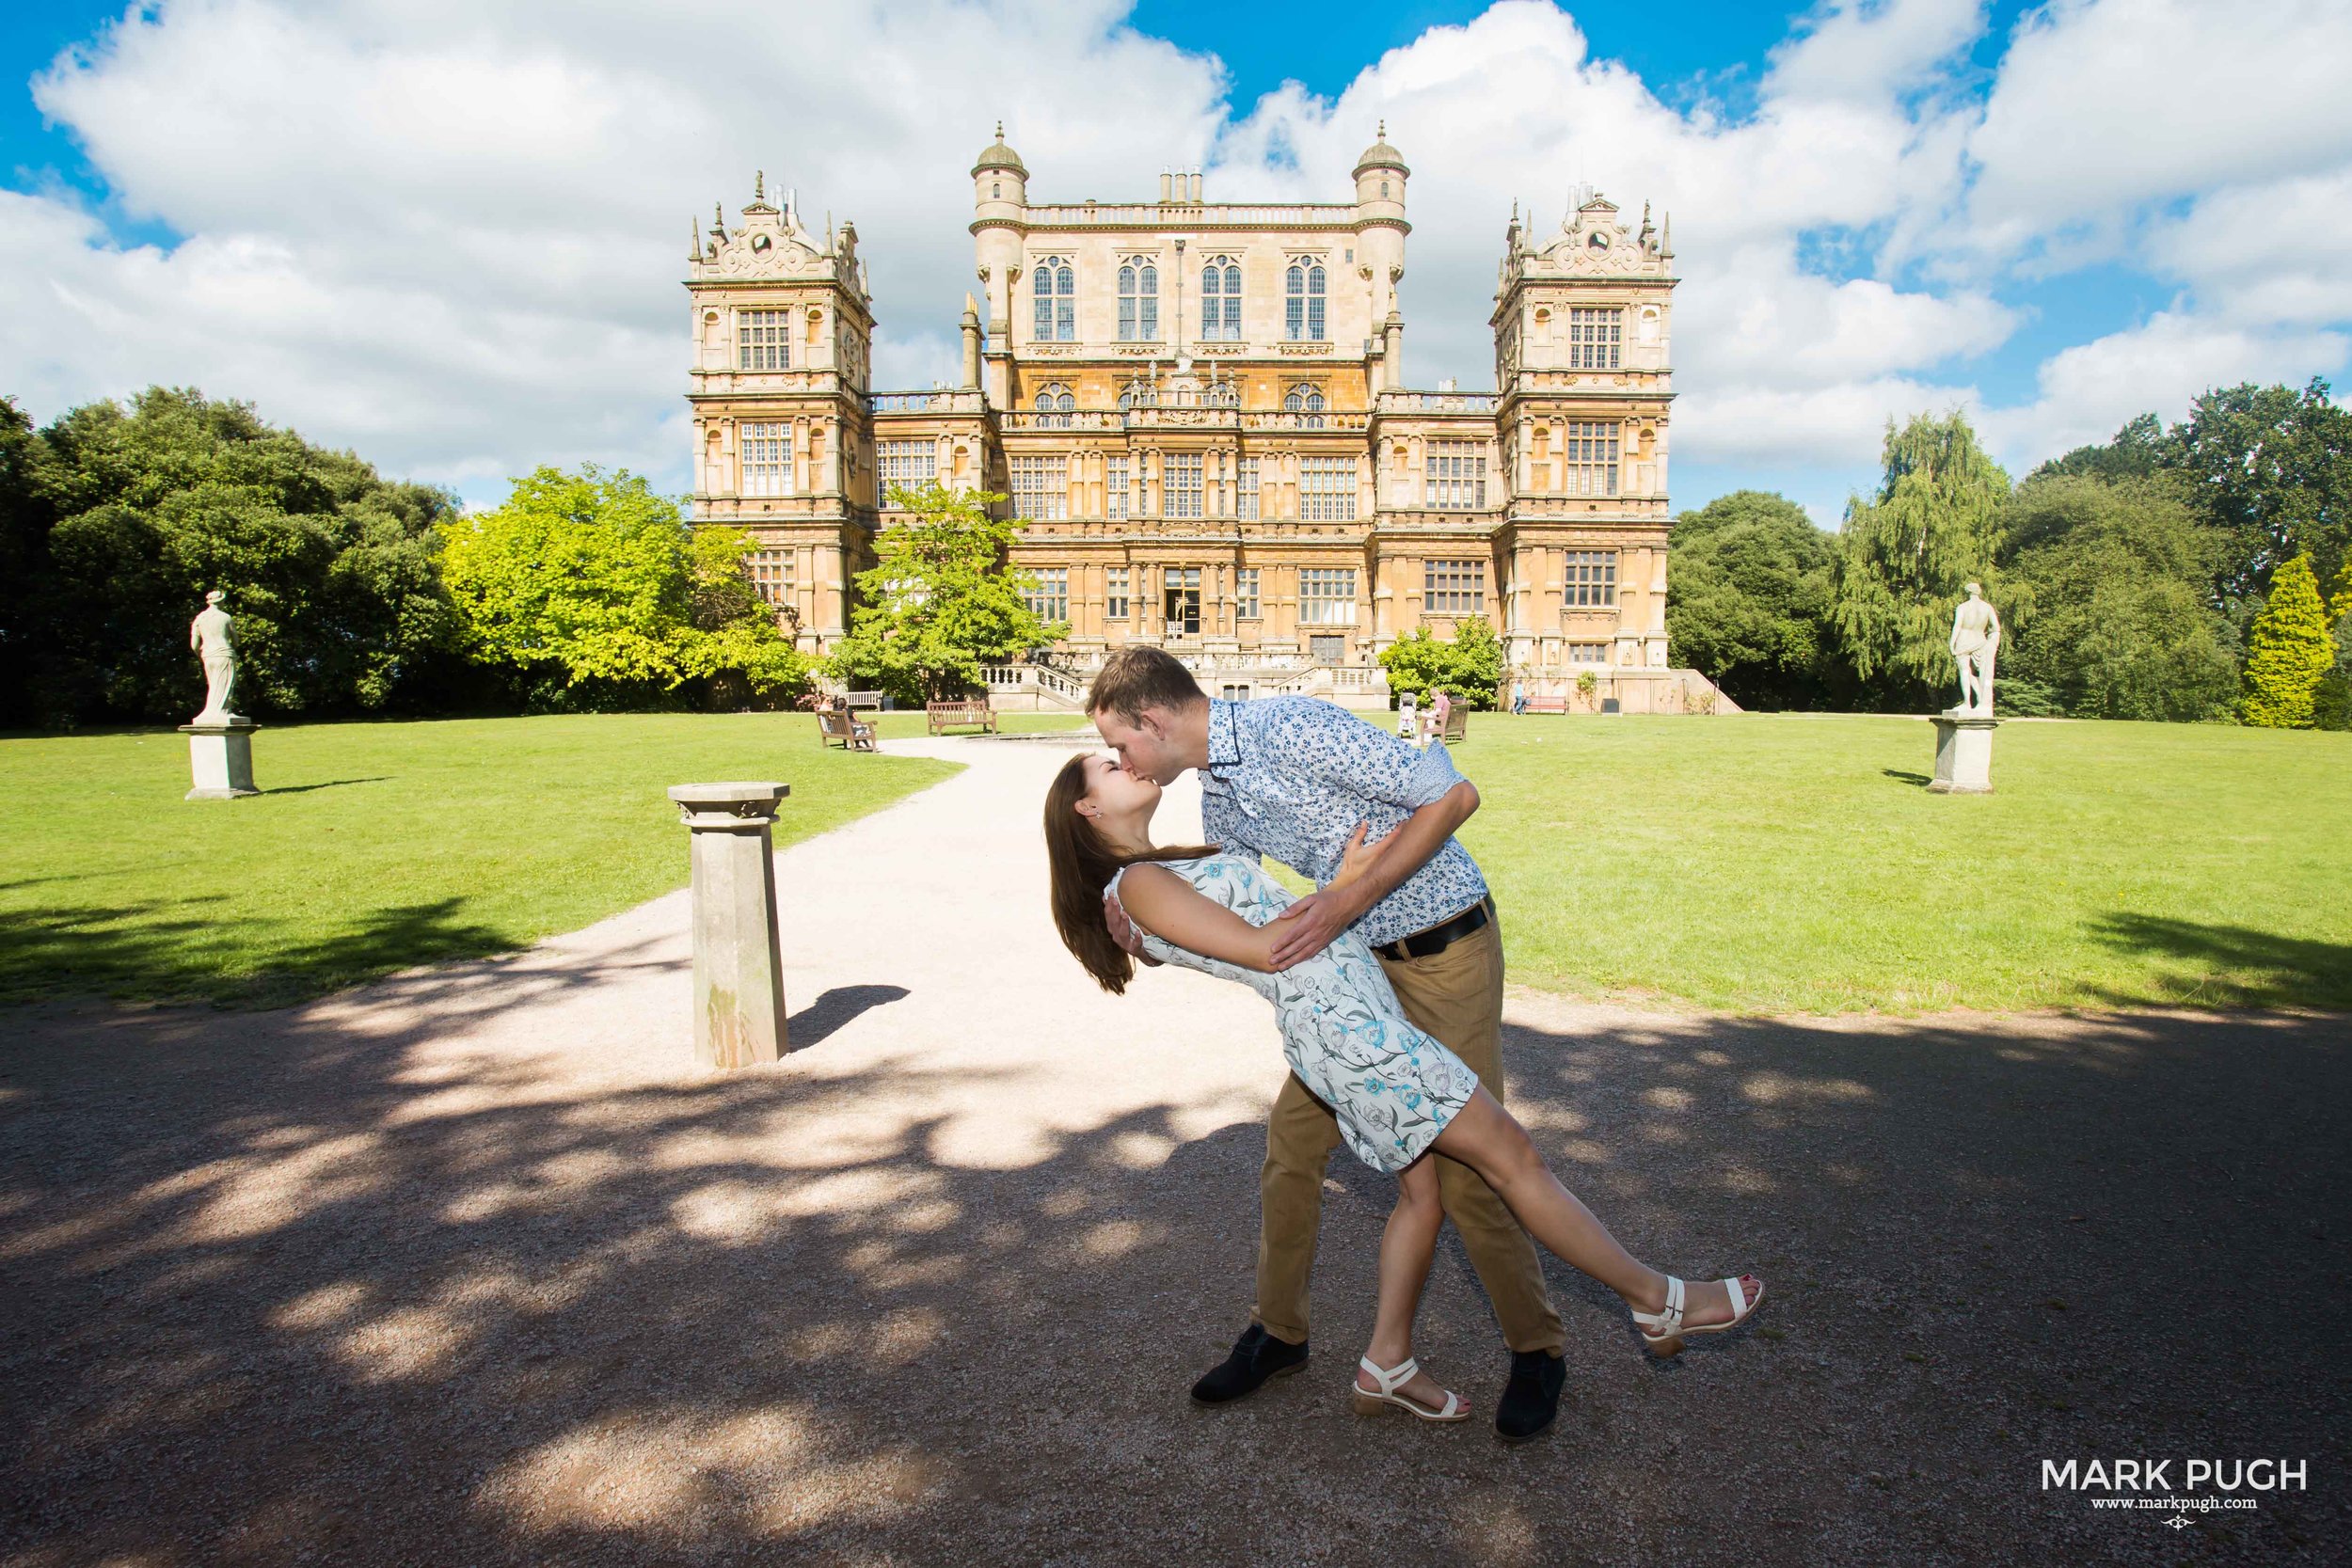 028 - Adriana and James - fineART preWED Photography at Wollaton Hall in Nottingham by www.markpugh.com Mark Pugh of www.mpmedia.co.uk_.JPG